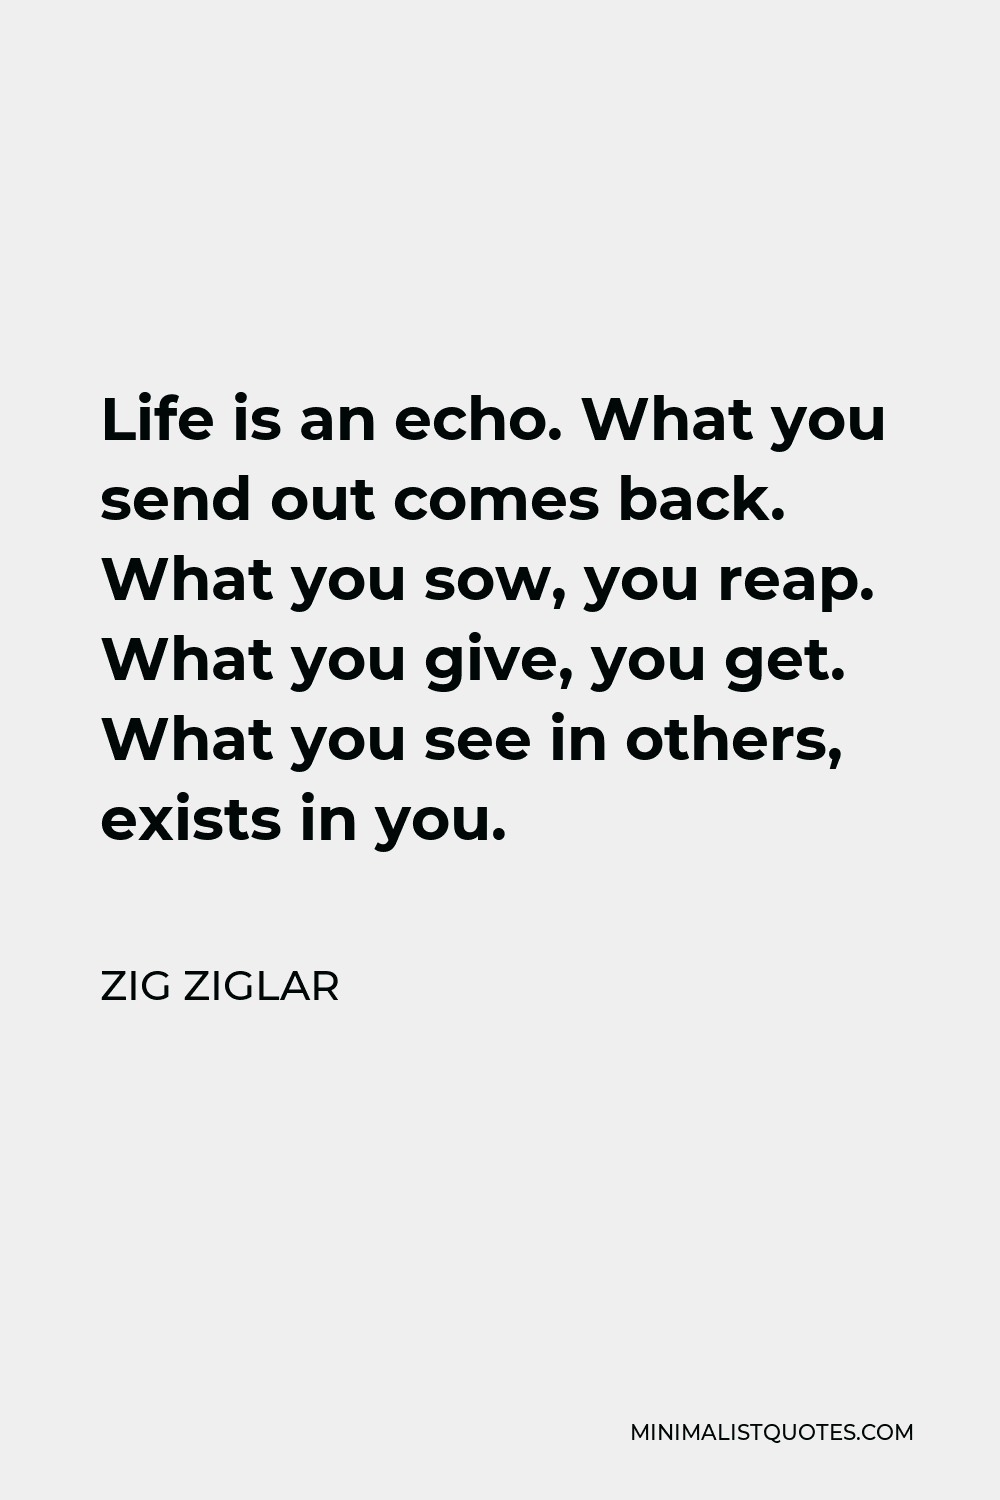 Zig Ziglar Quote - Life is an echo. What you send out comes back. What you sow, you reap. What you give, you get. What you see in others, exists in you.